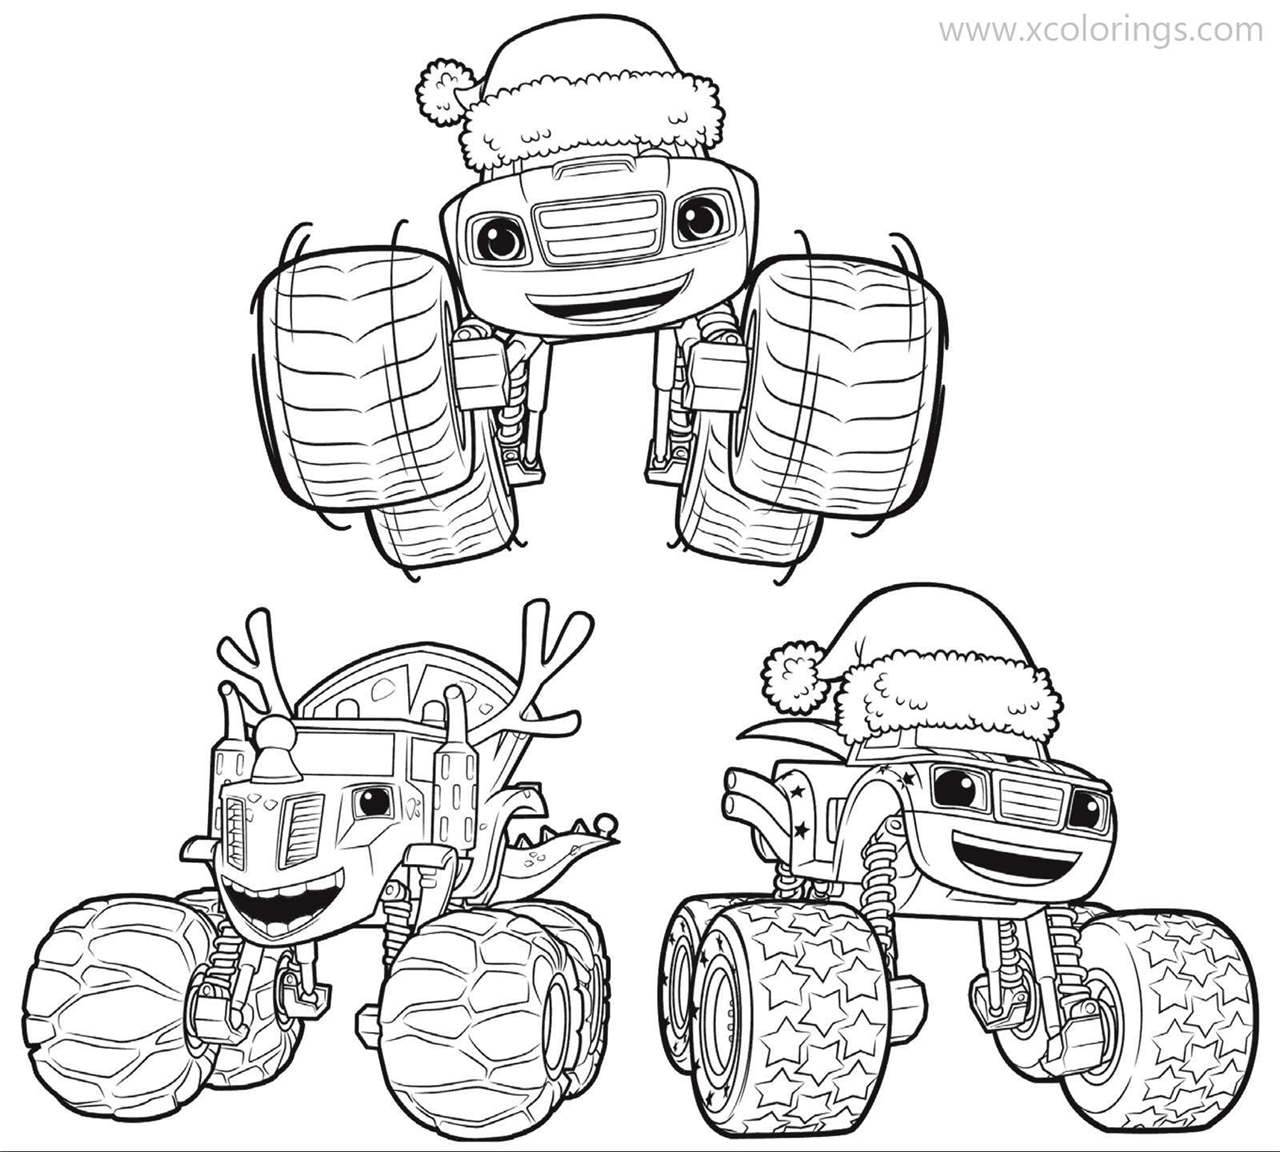 Free Christmas Blaze and the Monster Machines Coloring Pages printable